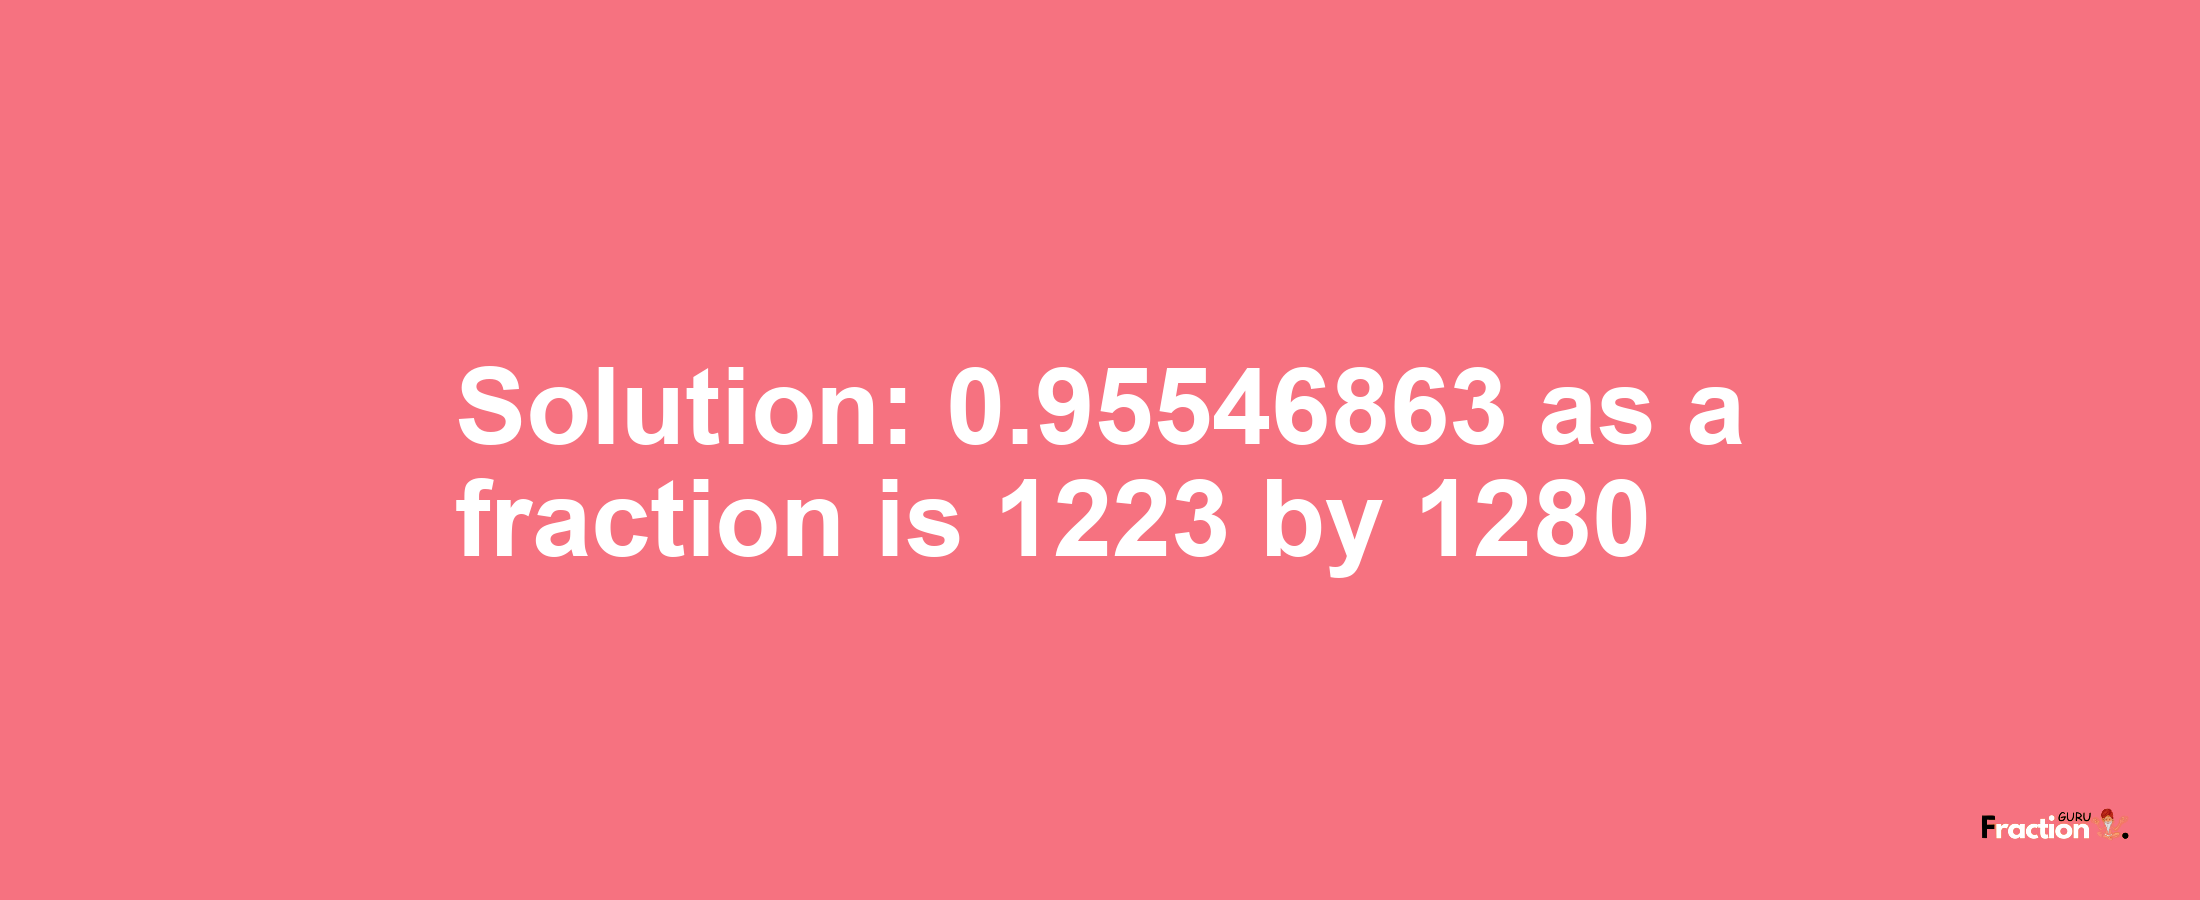 Solution:0.95546863 as a fraction is 1223/1280